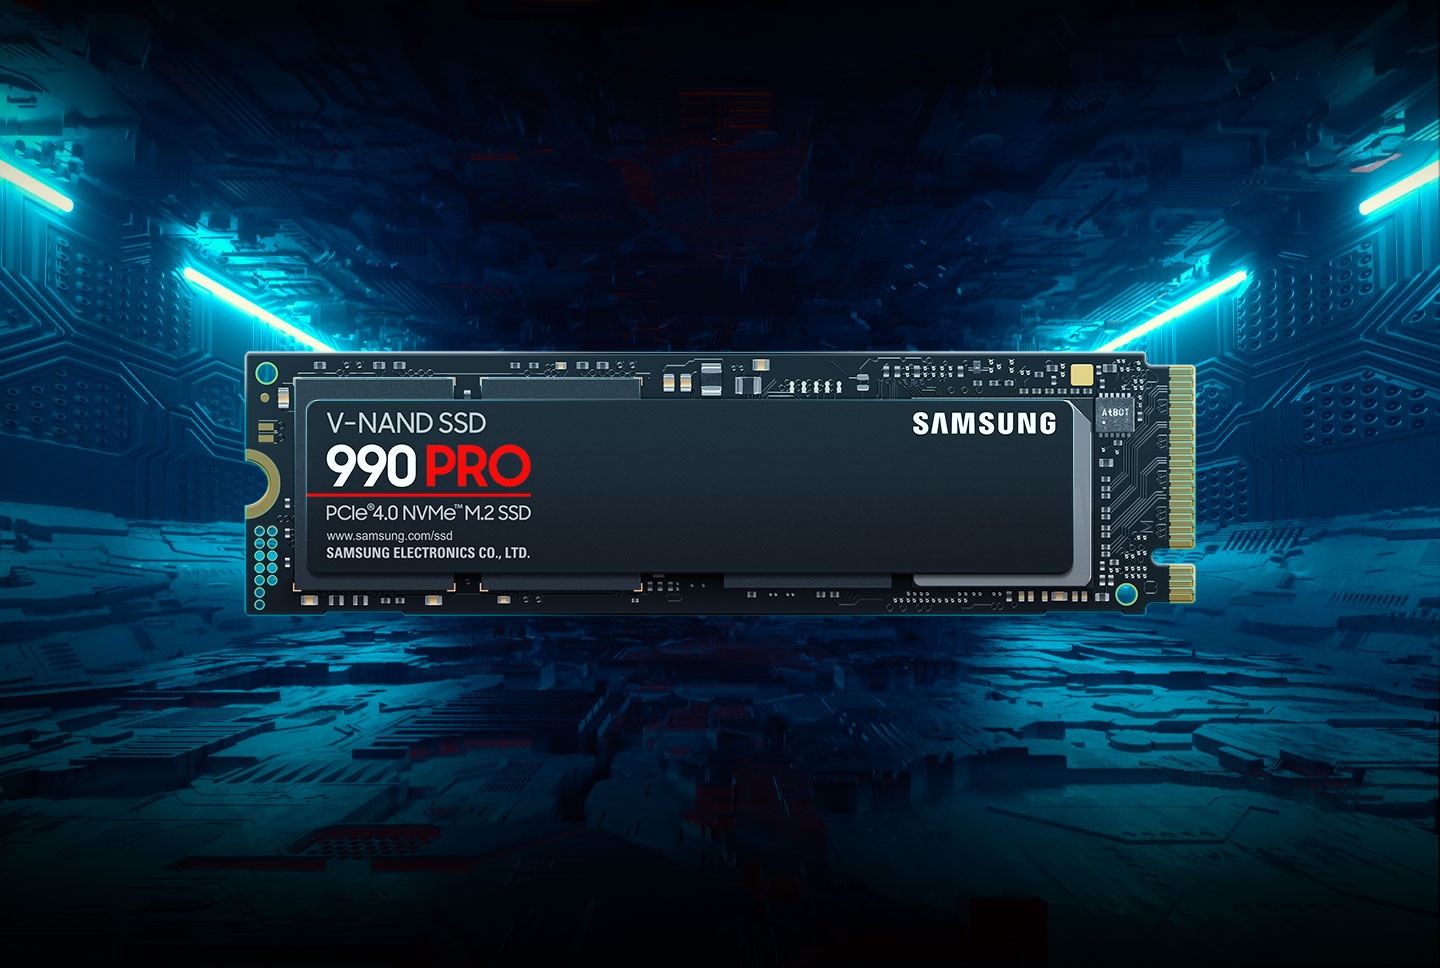 The 990 PRO is a new memory product with superior performance forgamers and heavy users.